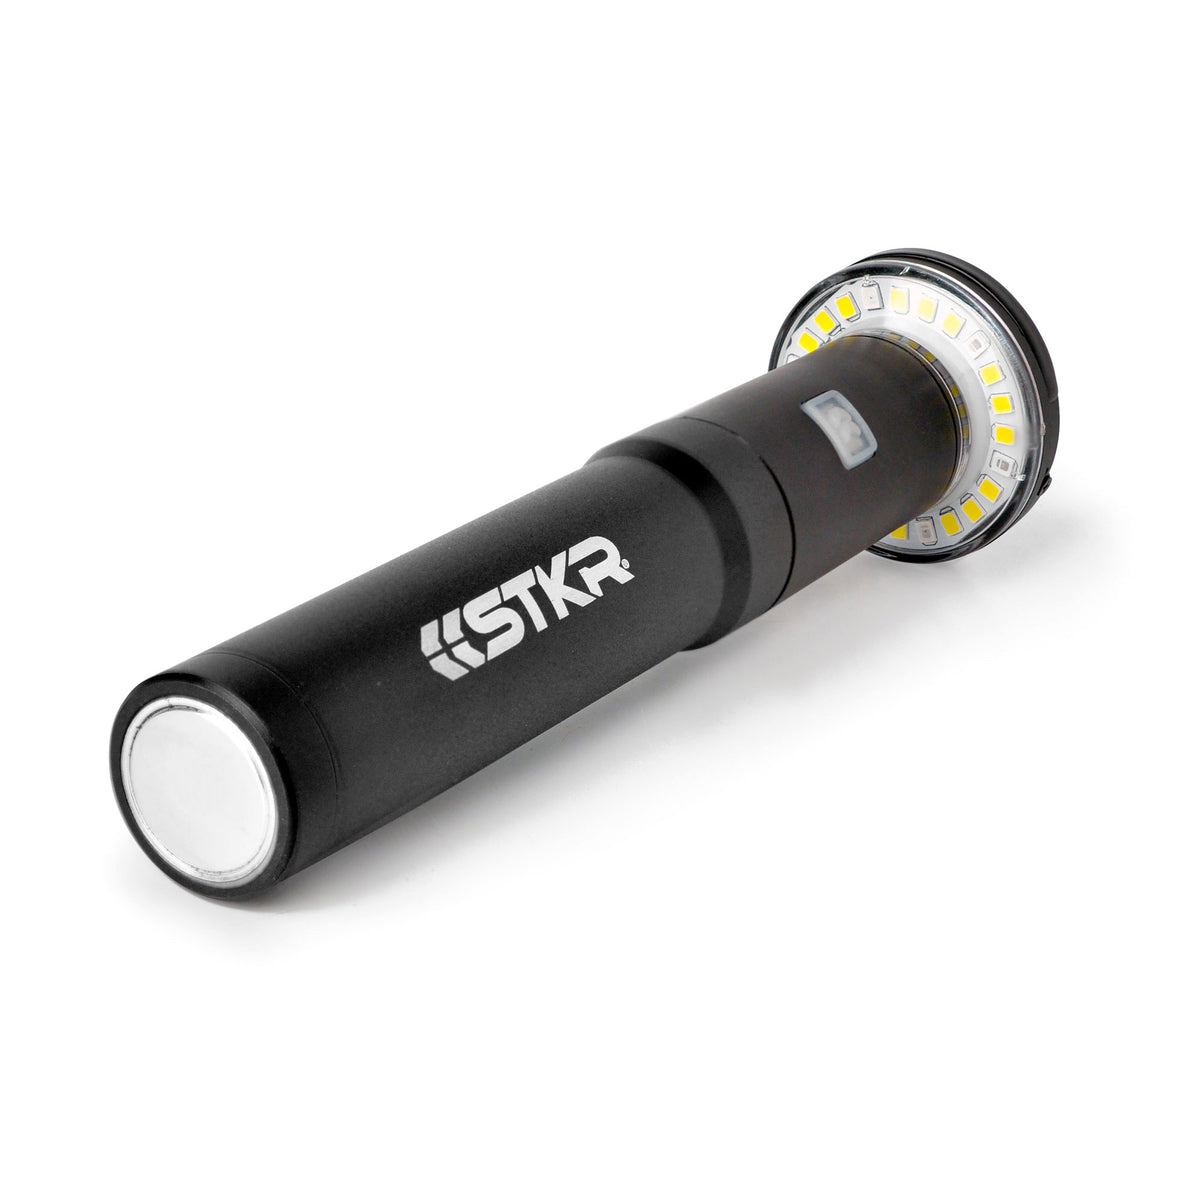 Flashlight or Lantern: Which is Better? - STKR Concepts